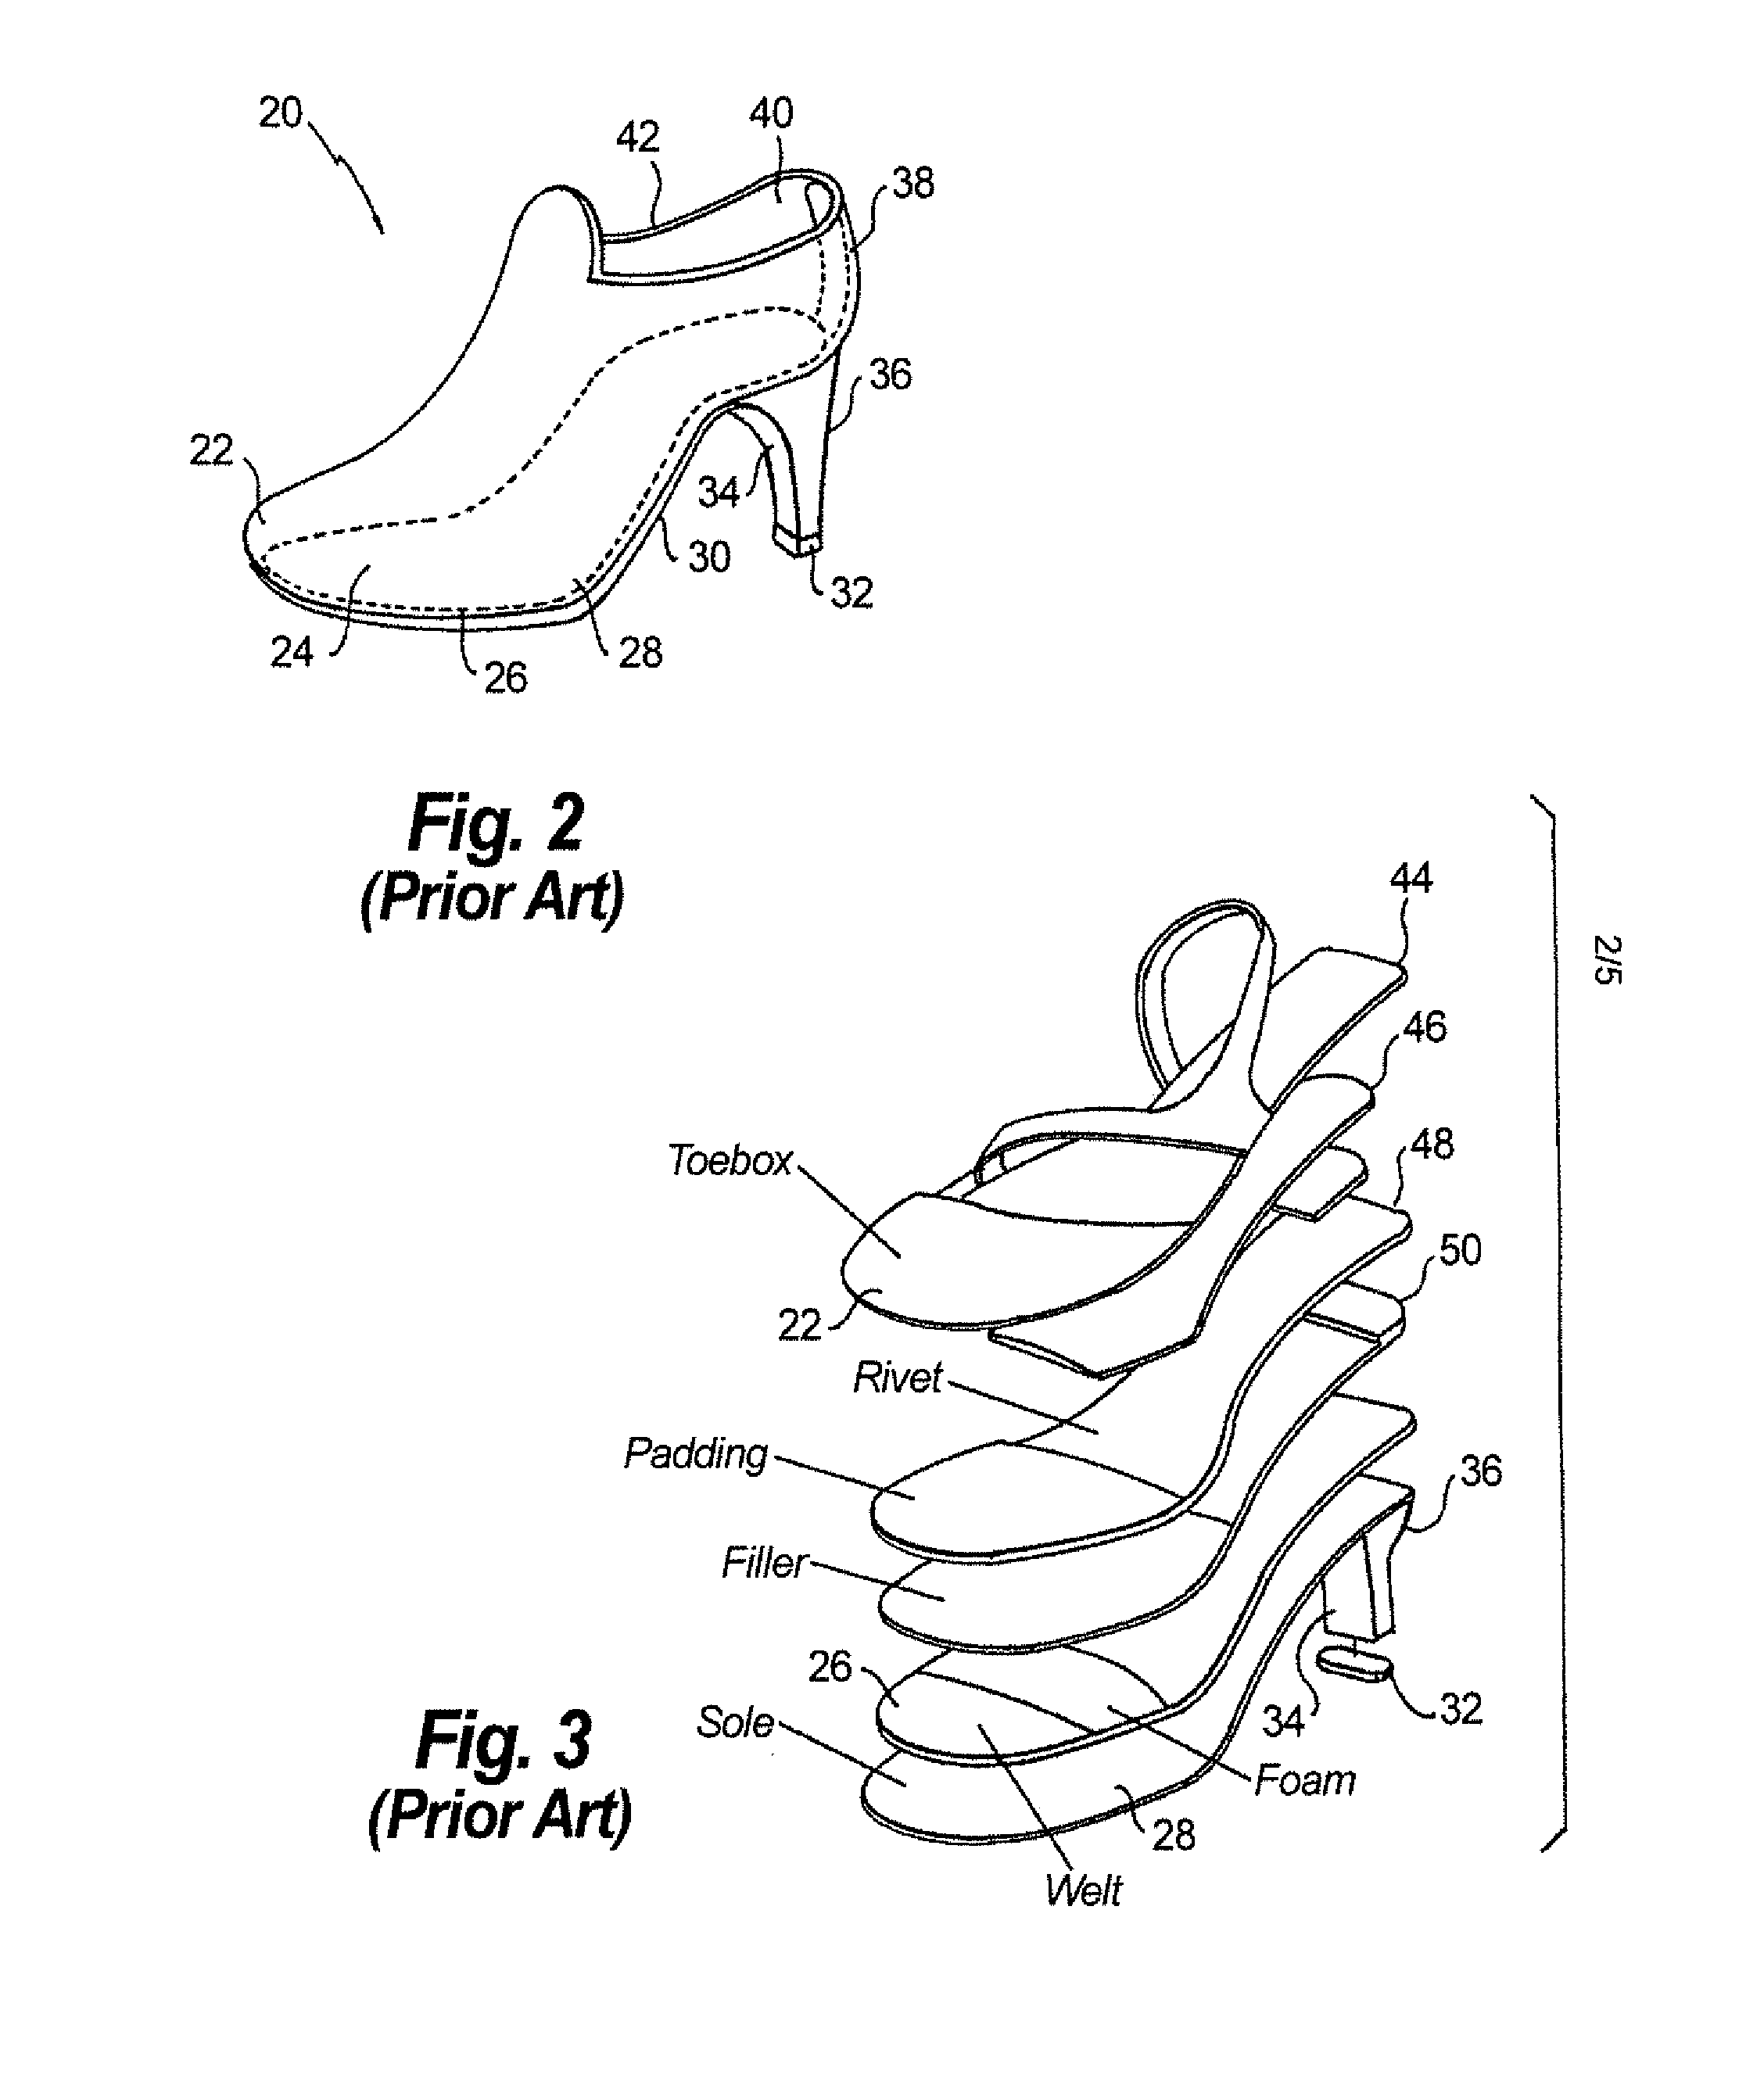 Shoe last and method for providing a shoe having an improved heel rest